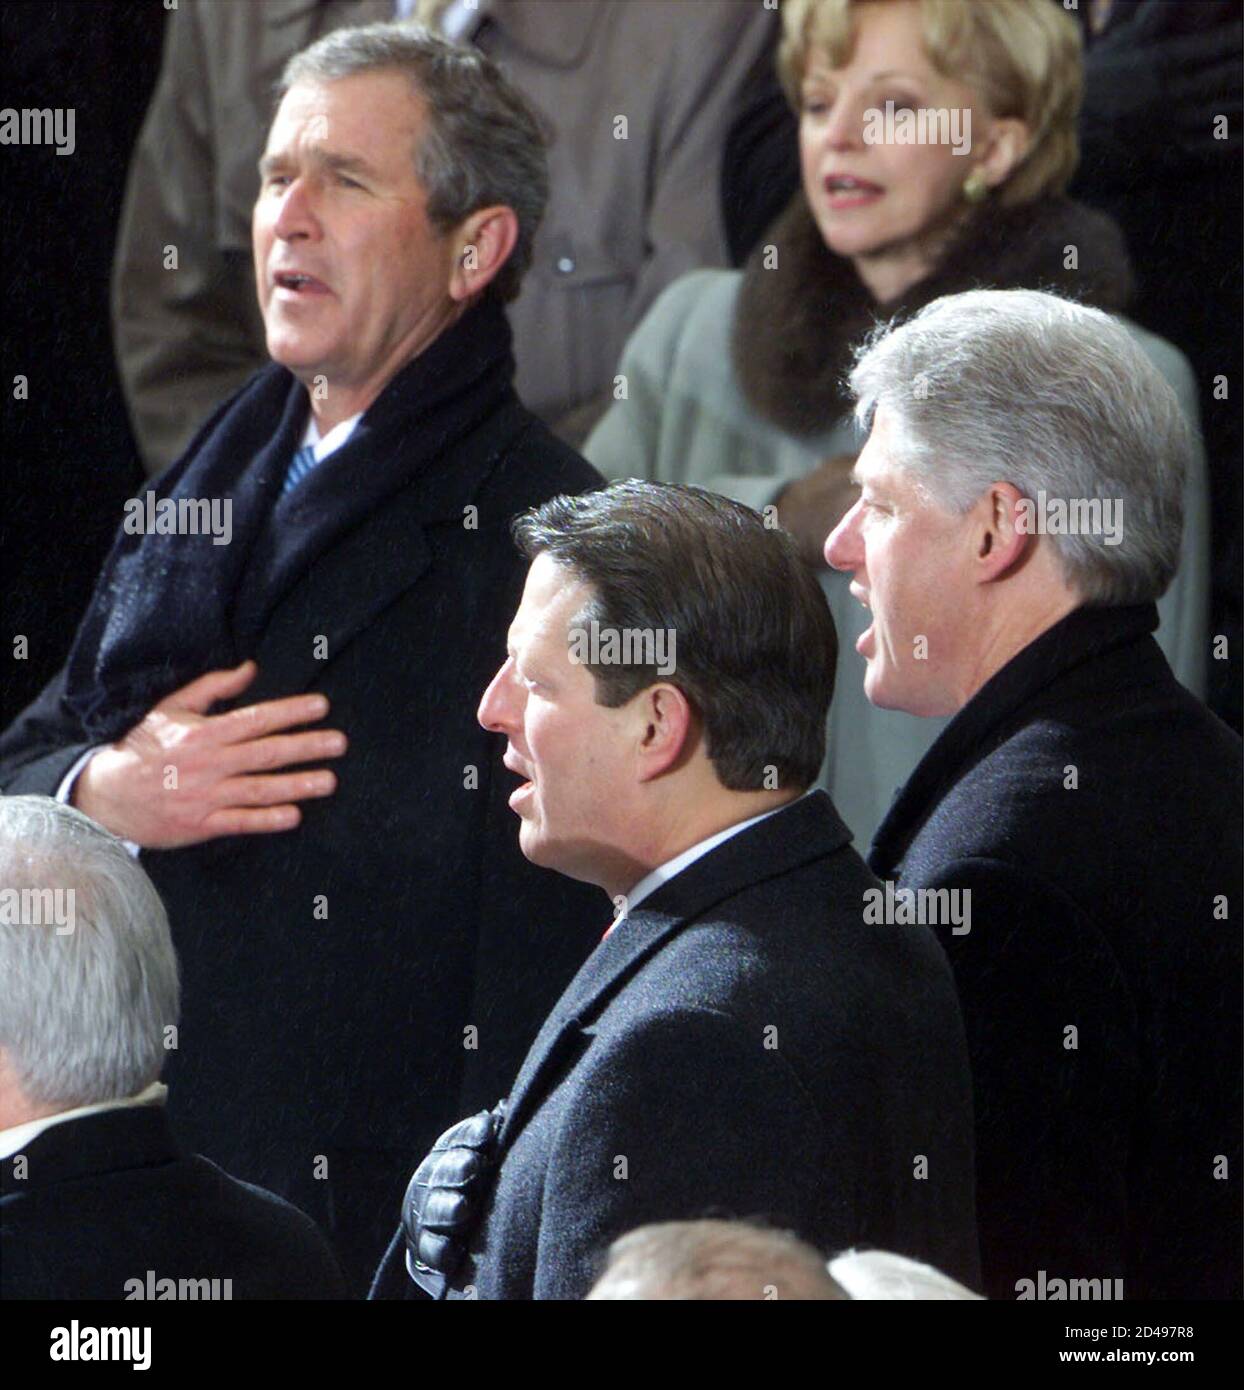 George W. Bush sings the national anthem standing with former president Bill Clinton (R) and vice president Al Gore, in Washington, January 20, 2001. Bush was sworn in as the 43rd President of the United States. Stock Photo